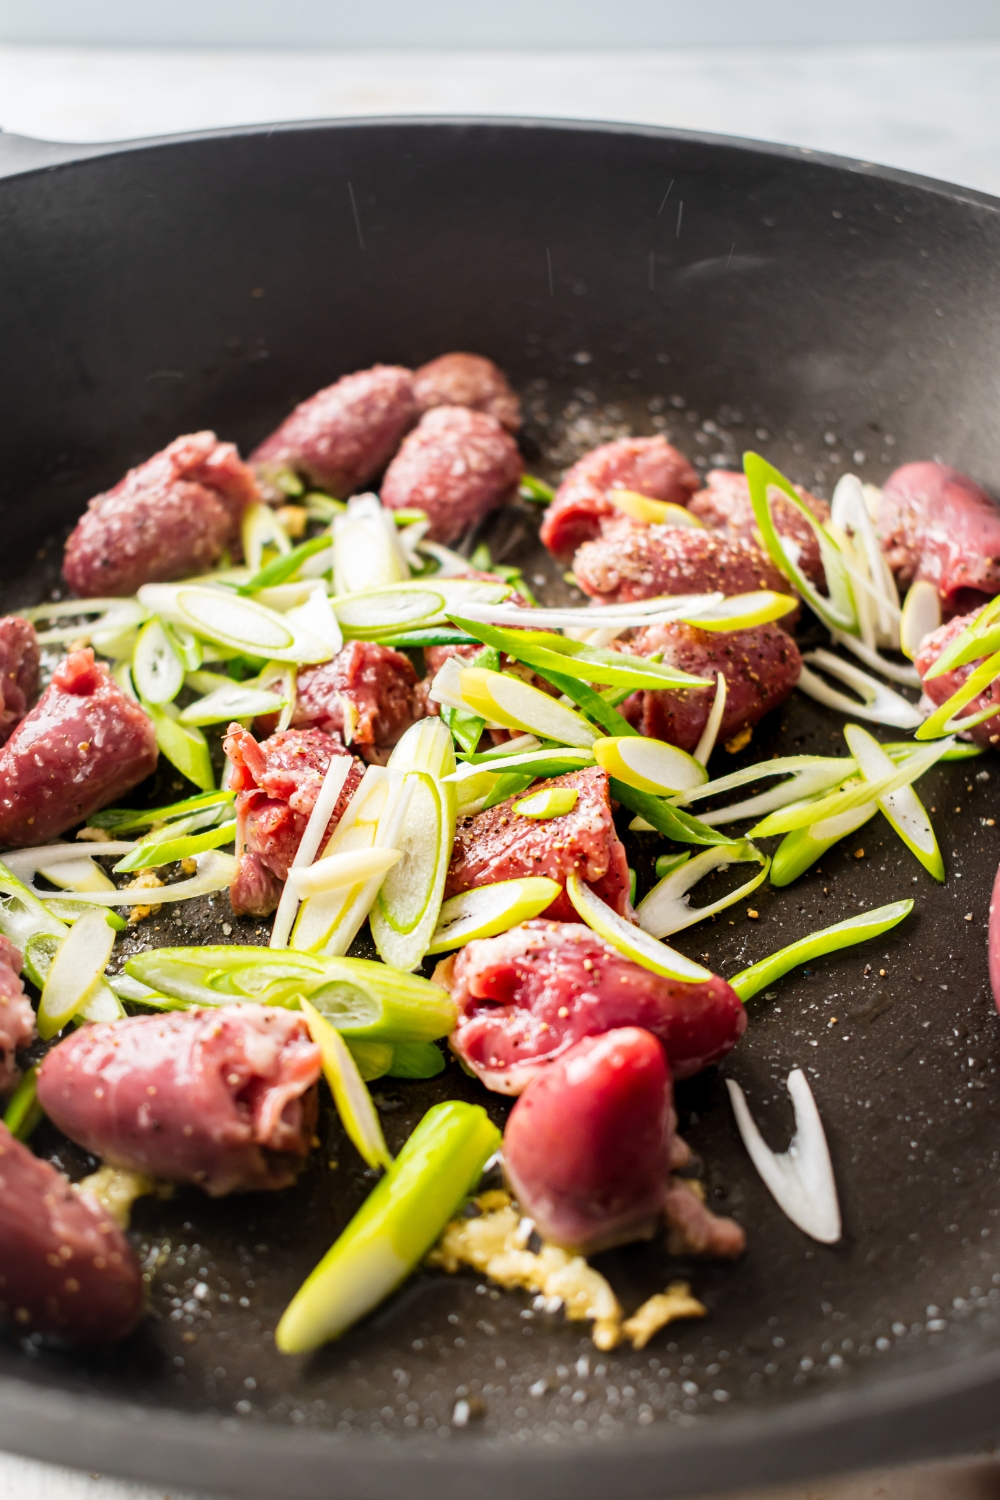 Green onion and raw chicken hearts in a skillet.